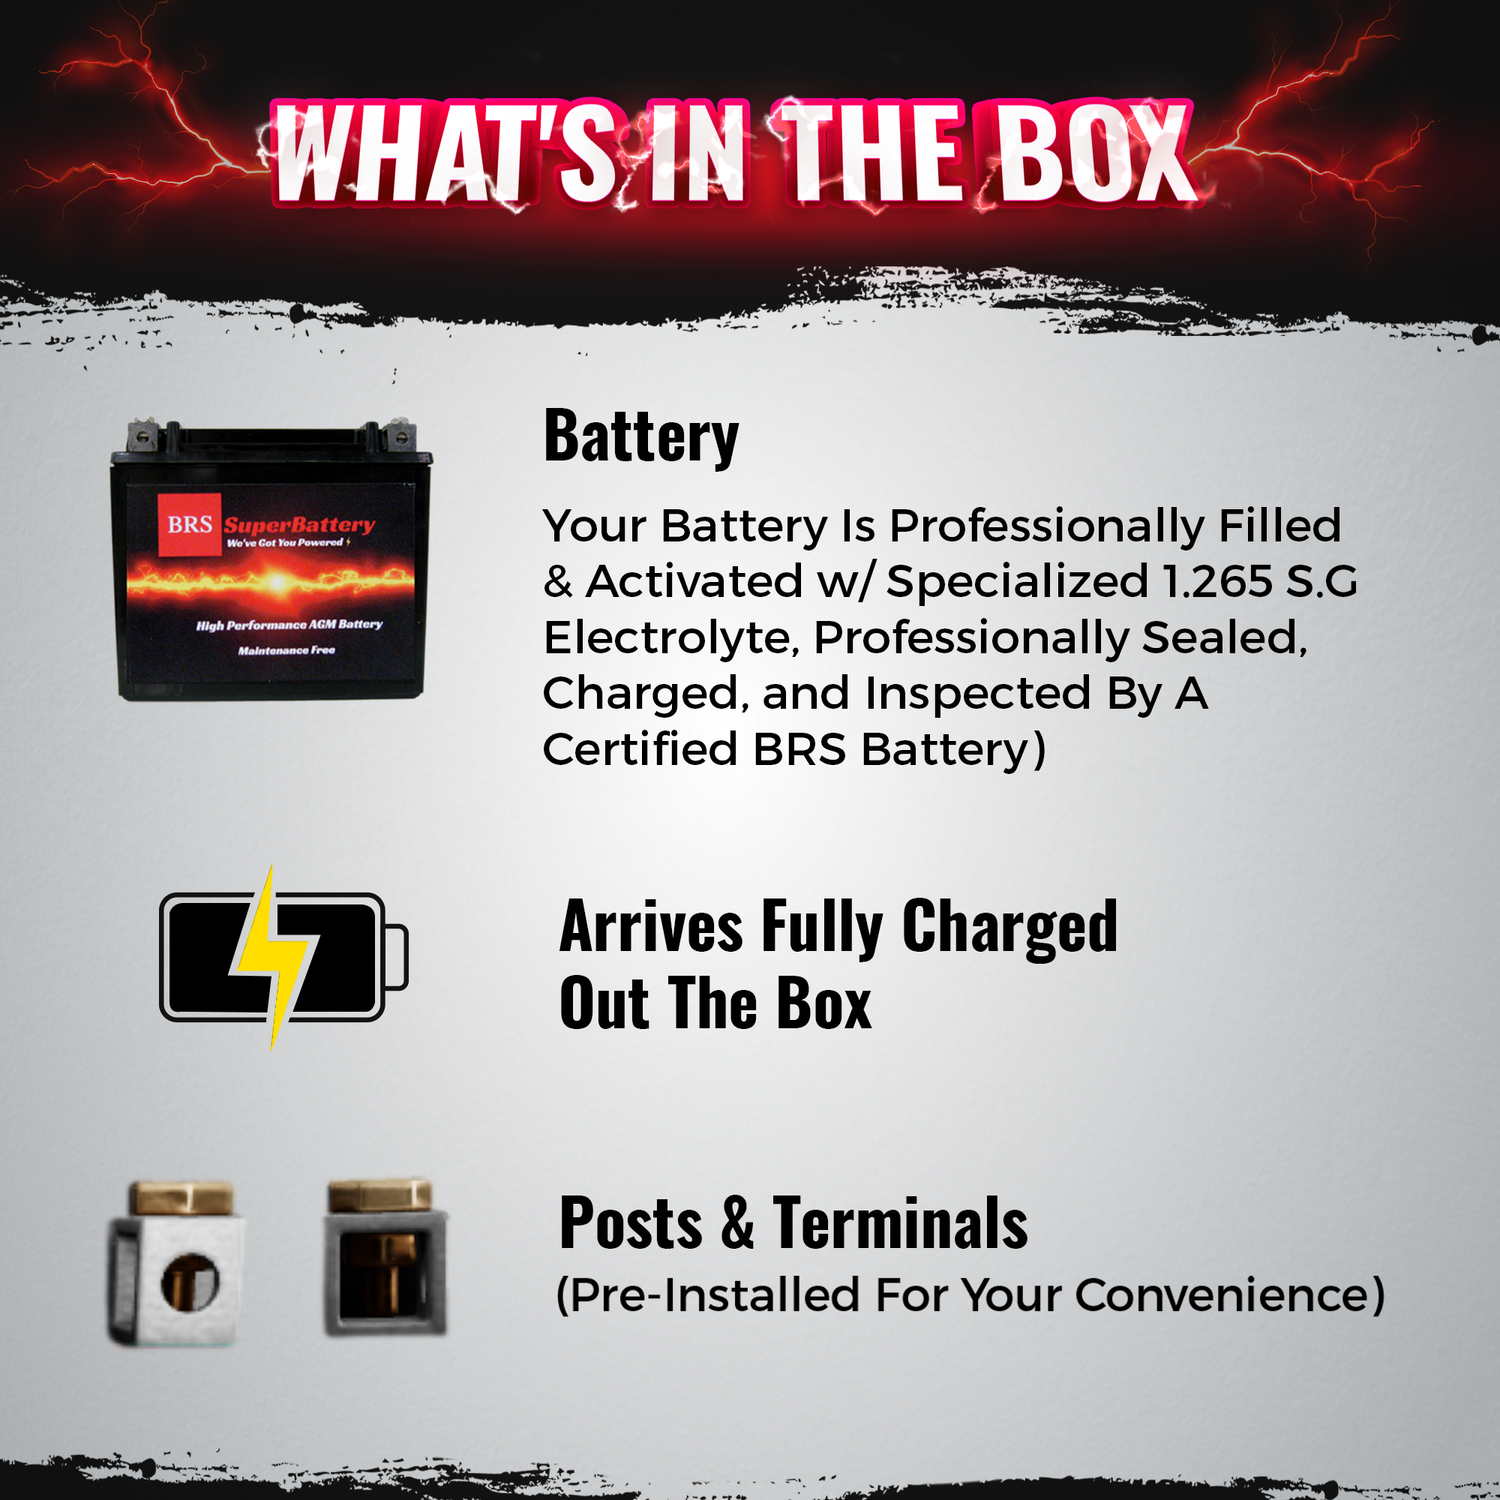 BRS9-BS 12v High Performance Sealed AGM PowerSport 2 Year Battery - BRS Super Battery